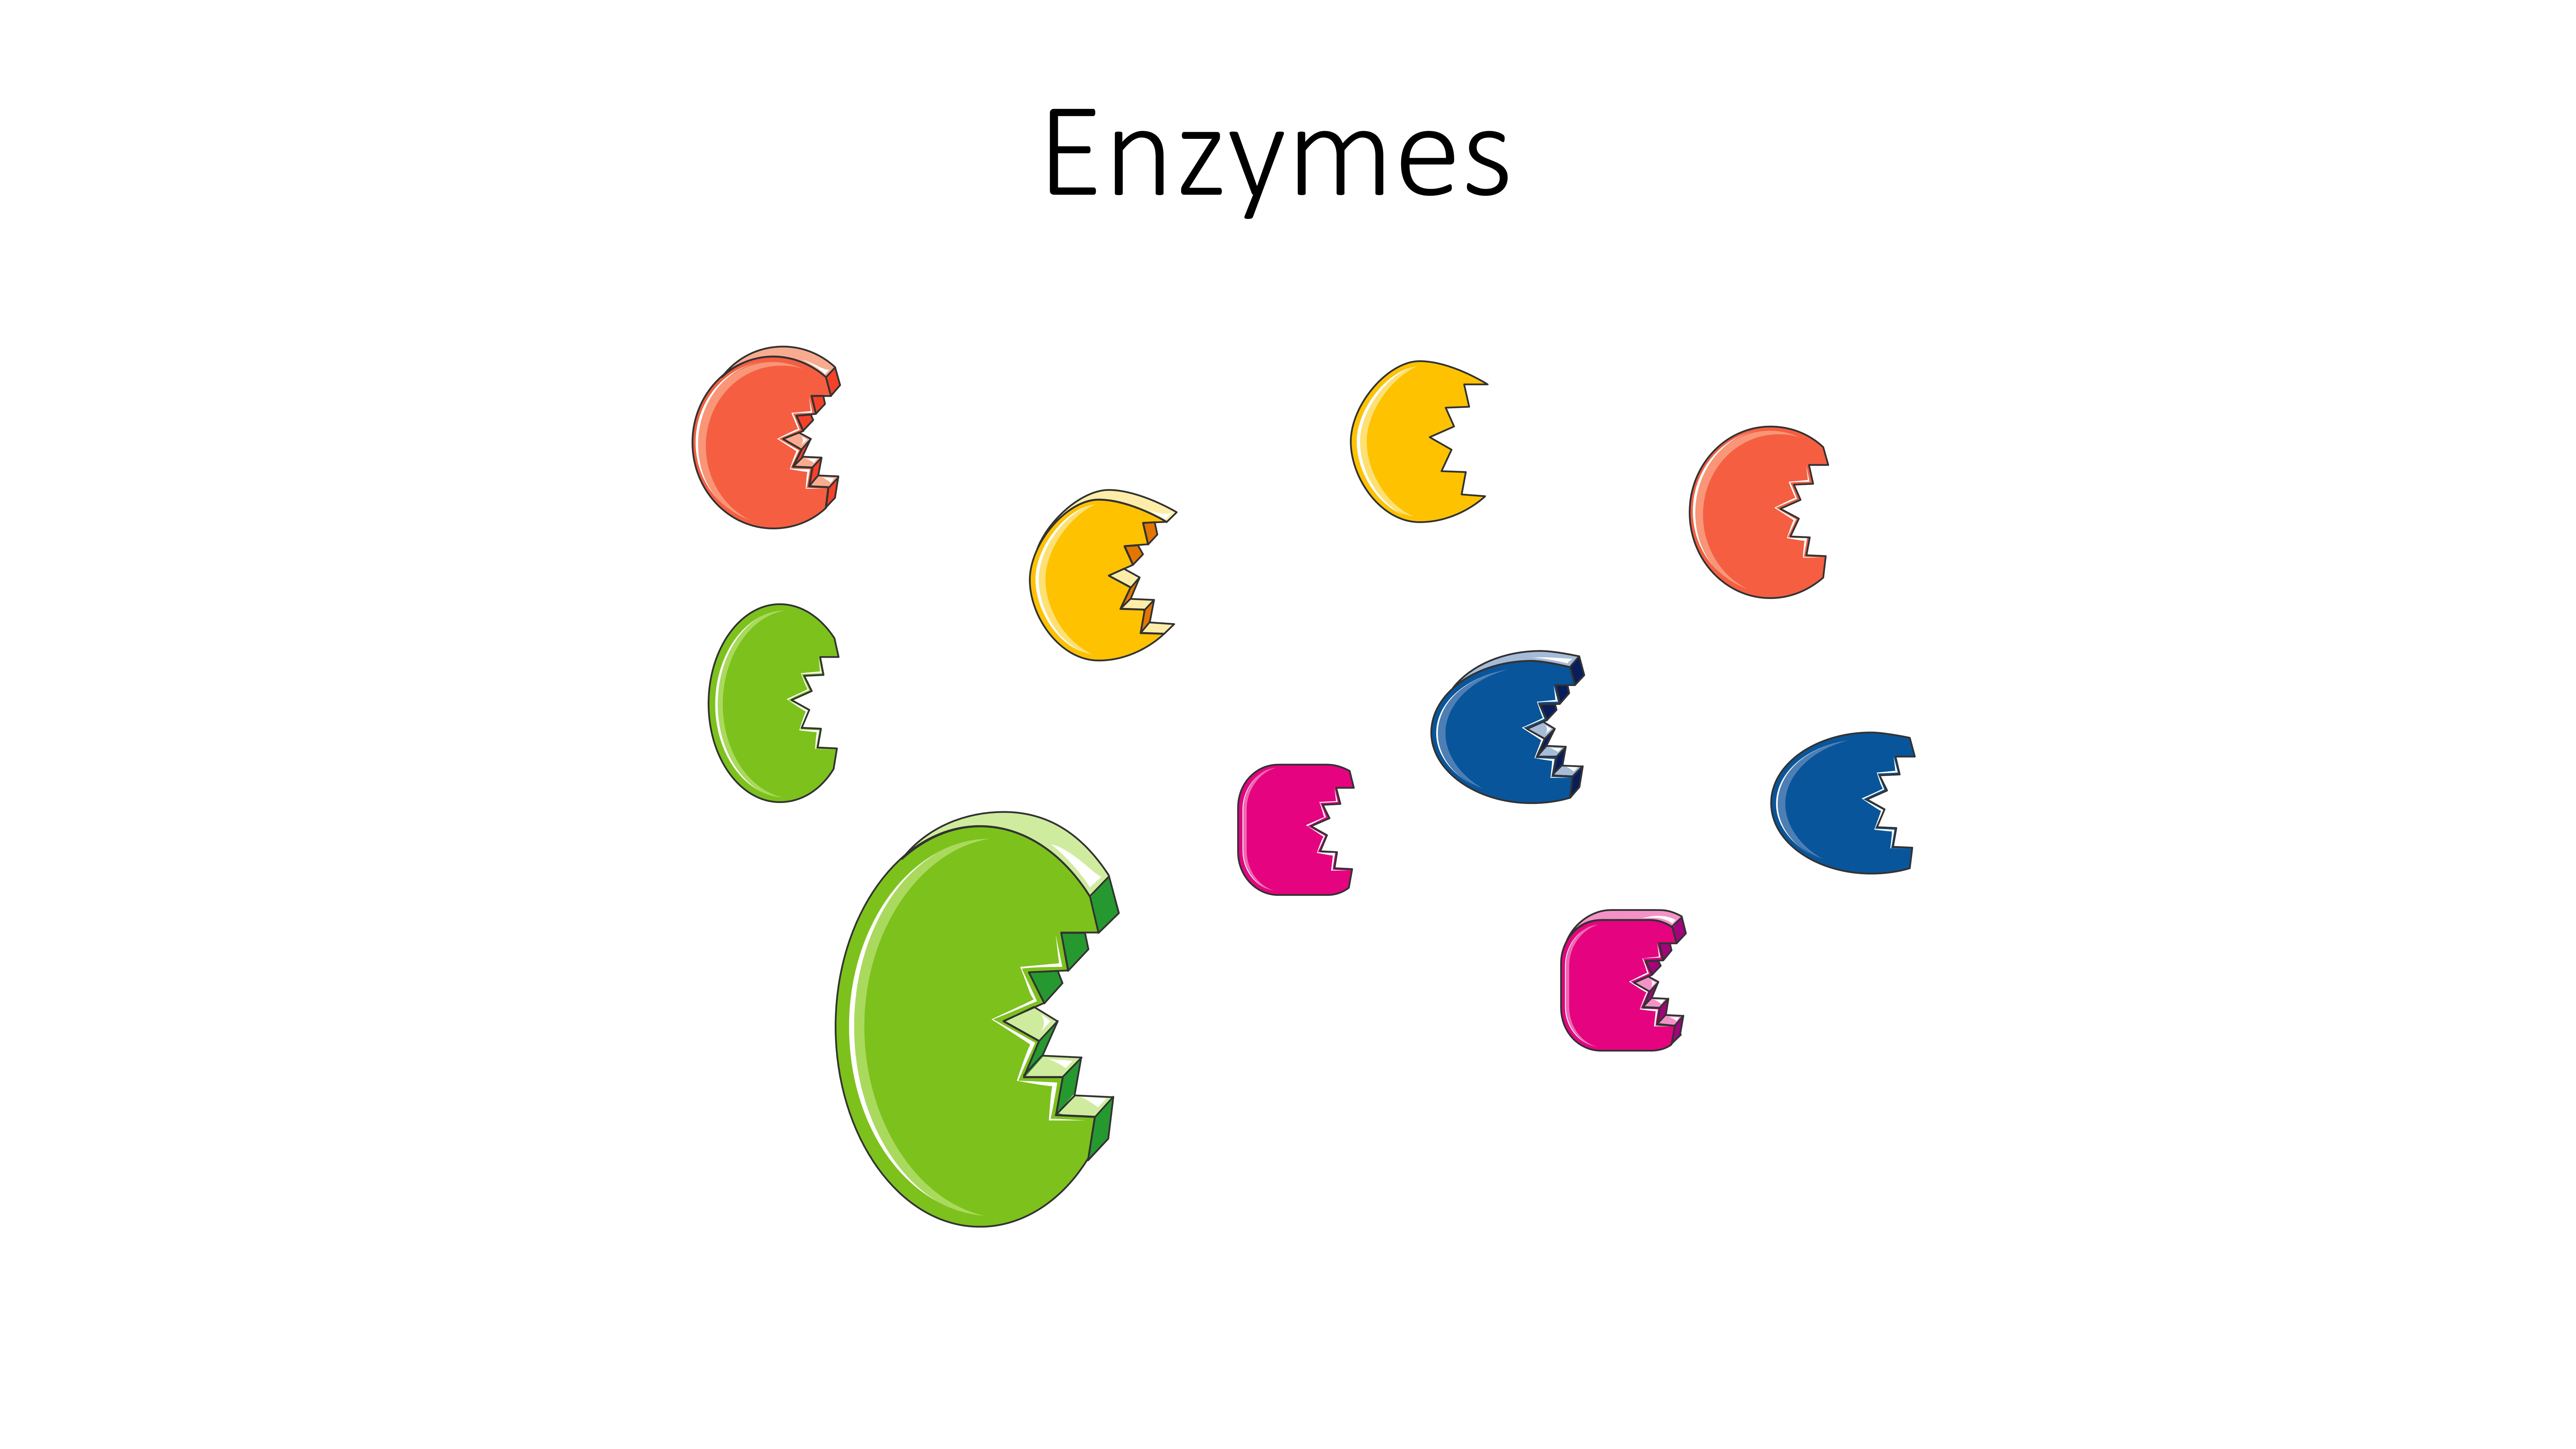 image of enzymes